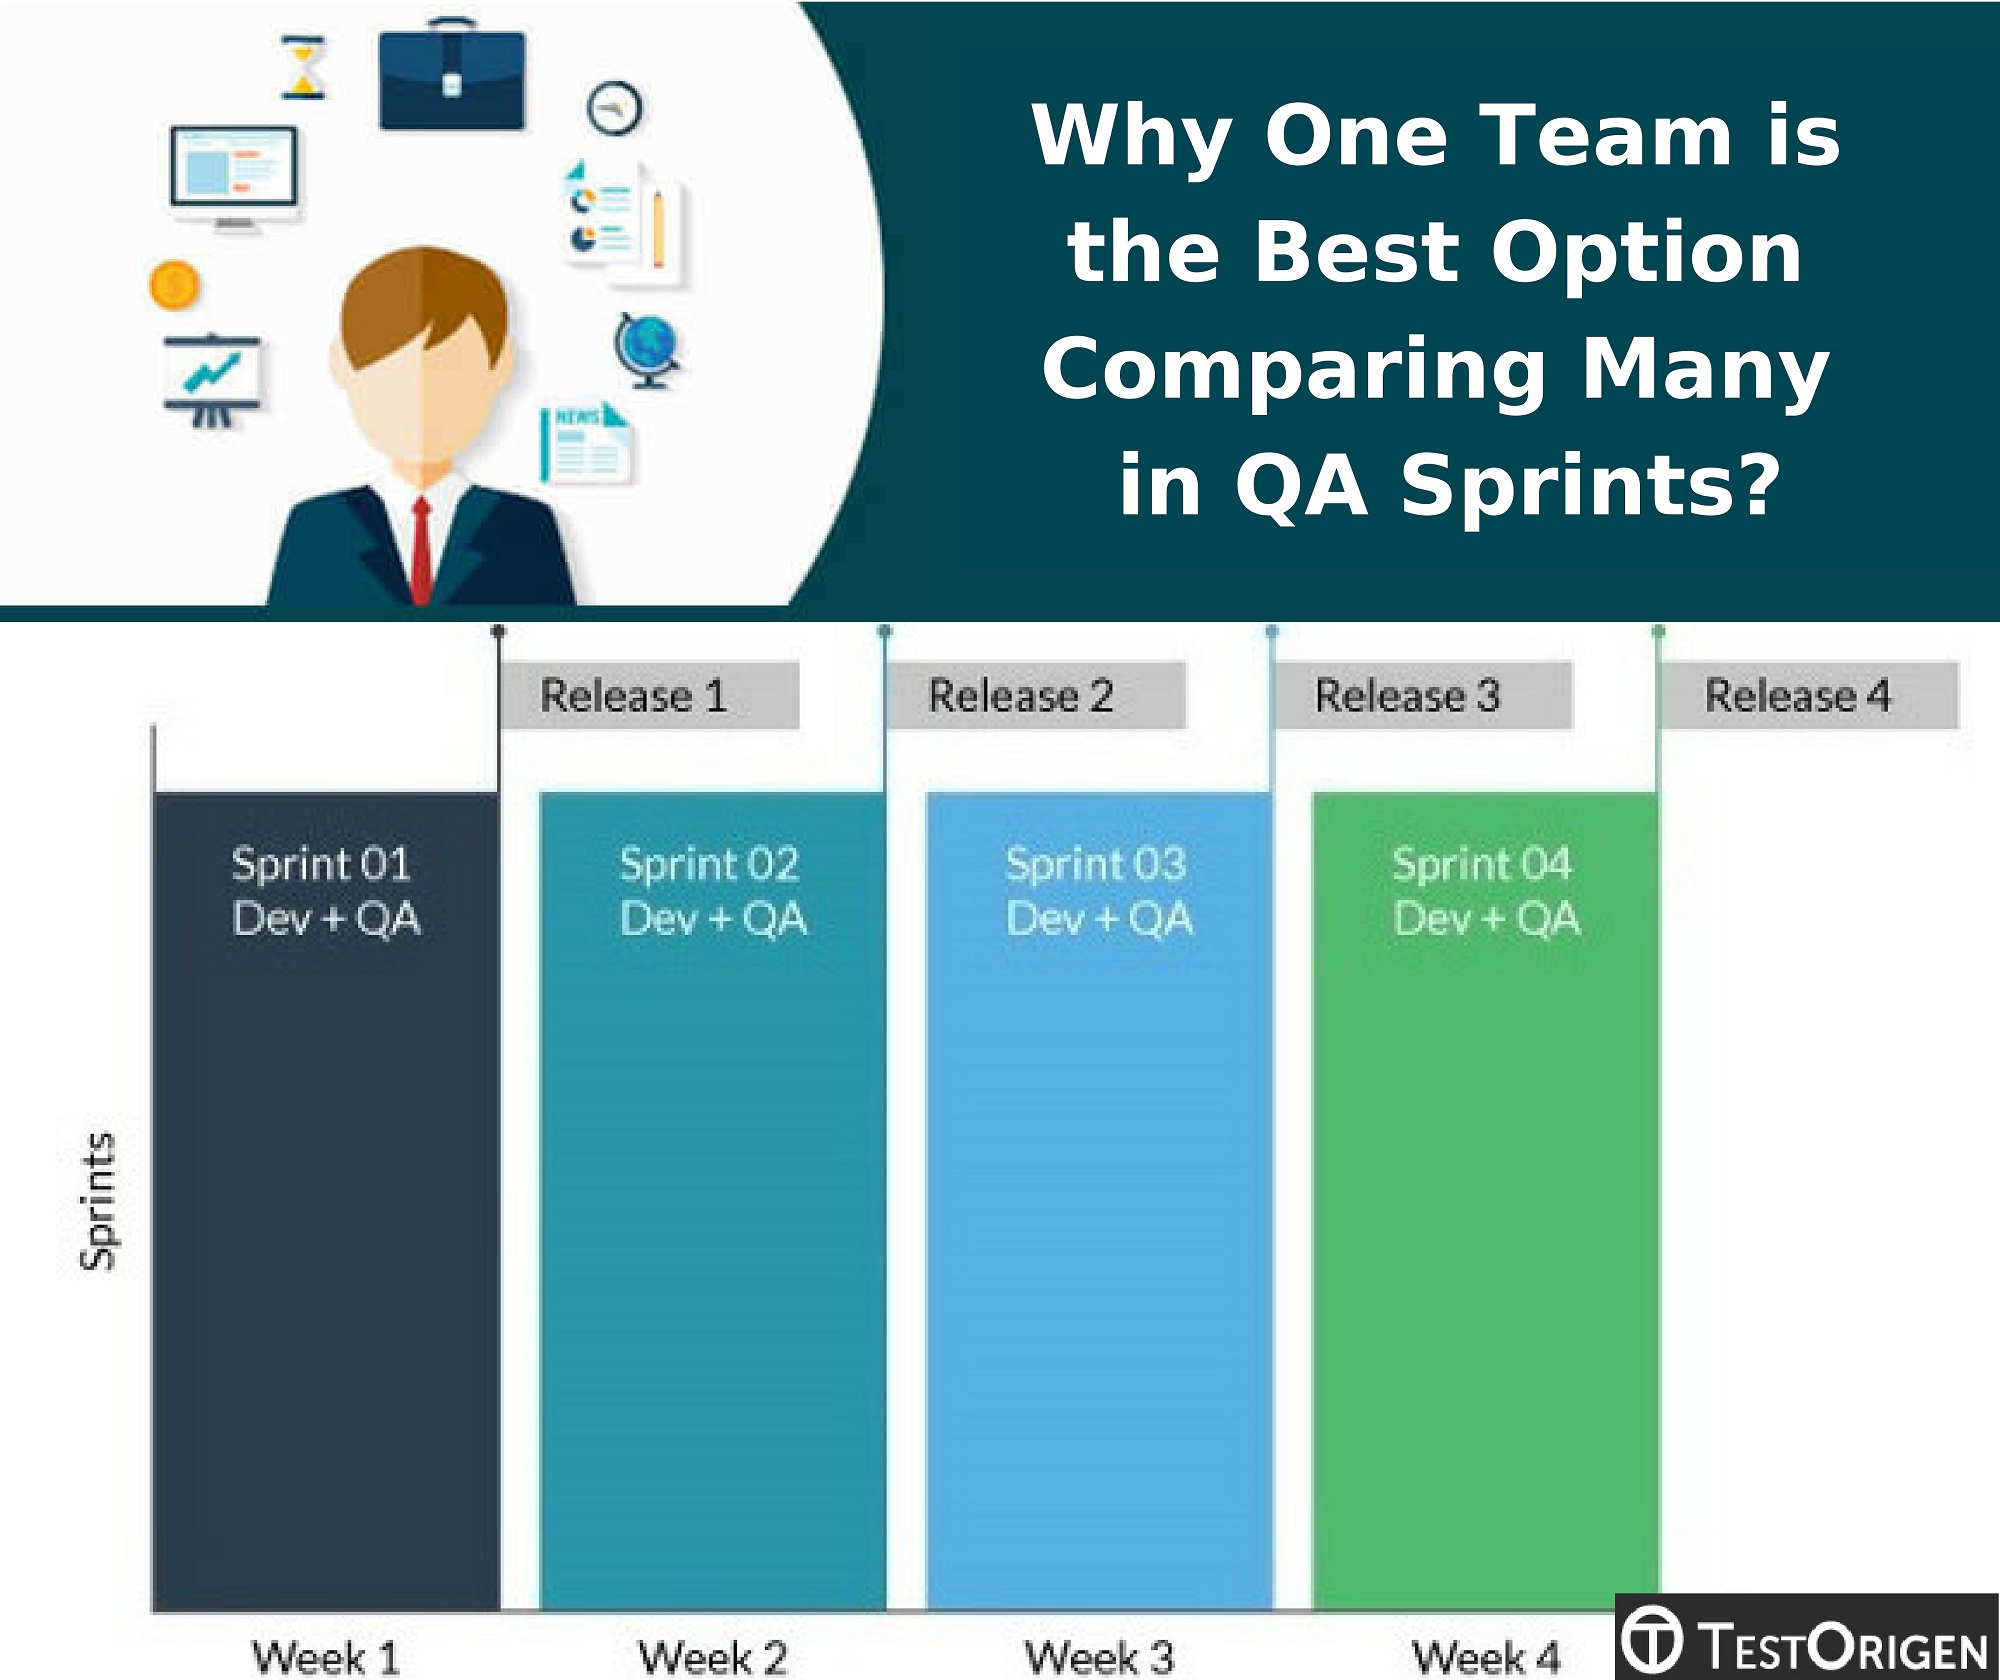 Why One Team is the Best Option Comparing Many in QA Sprints?